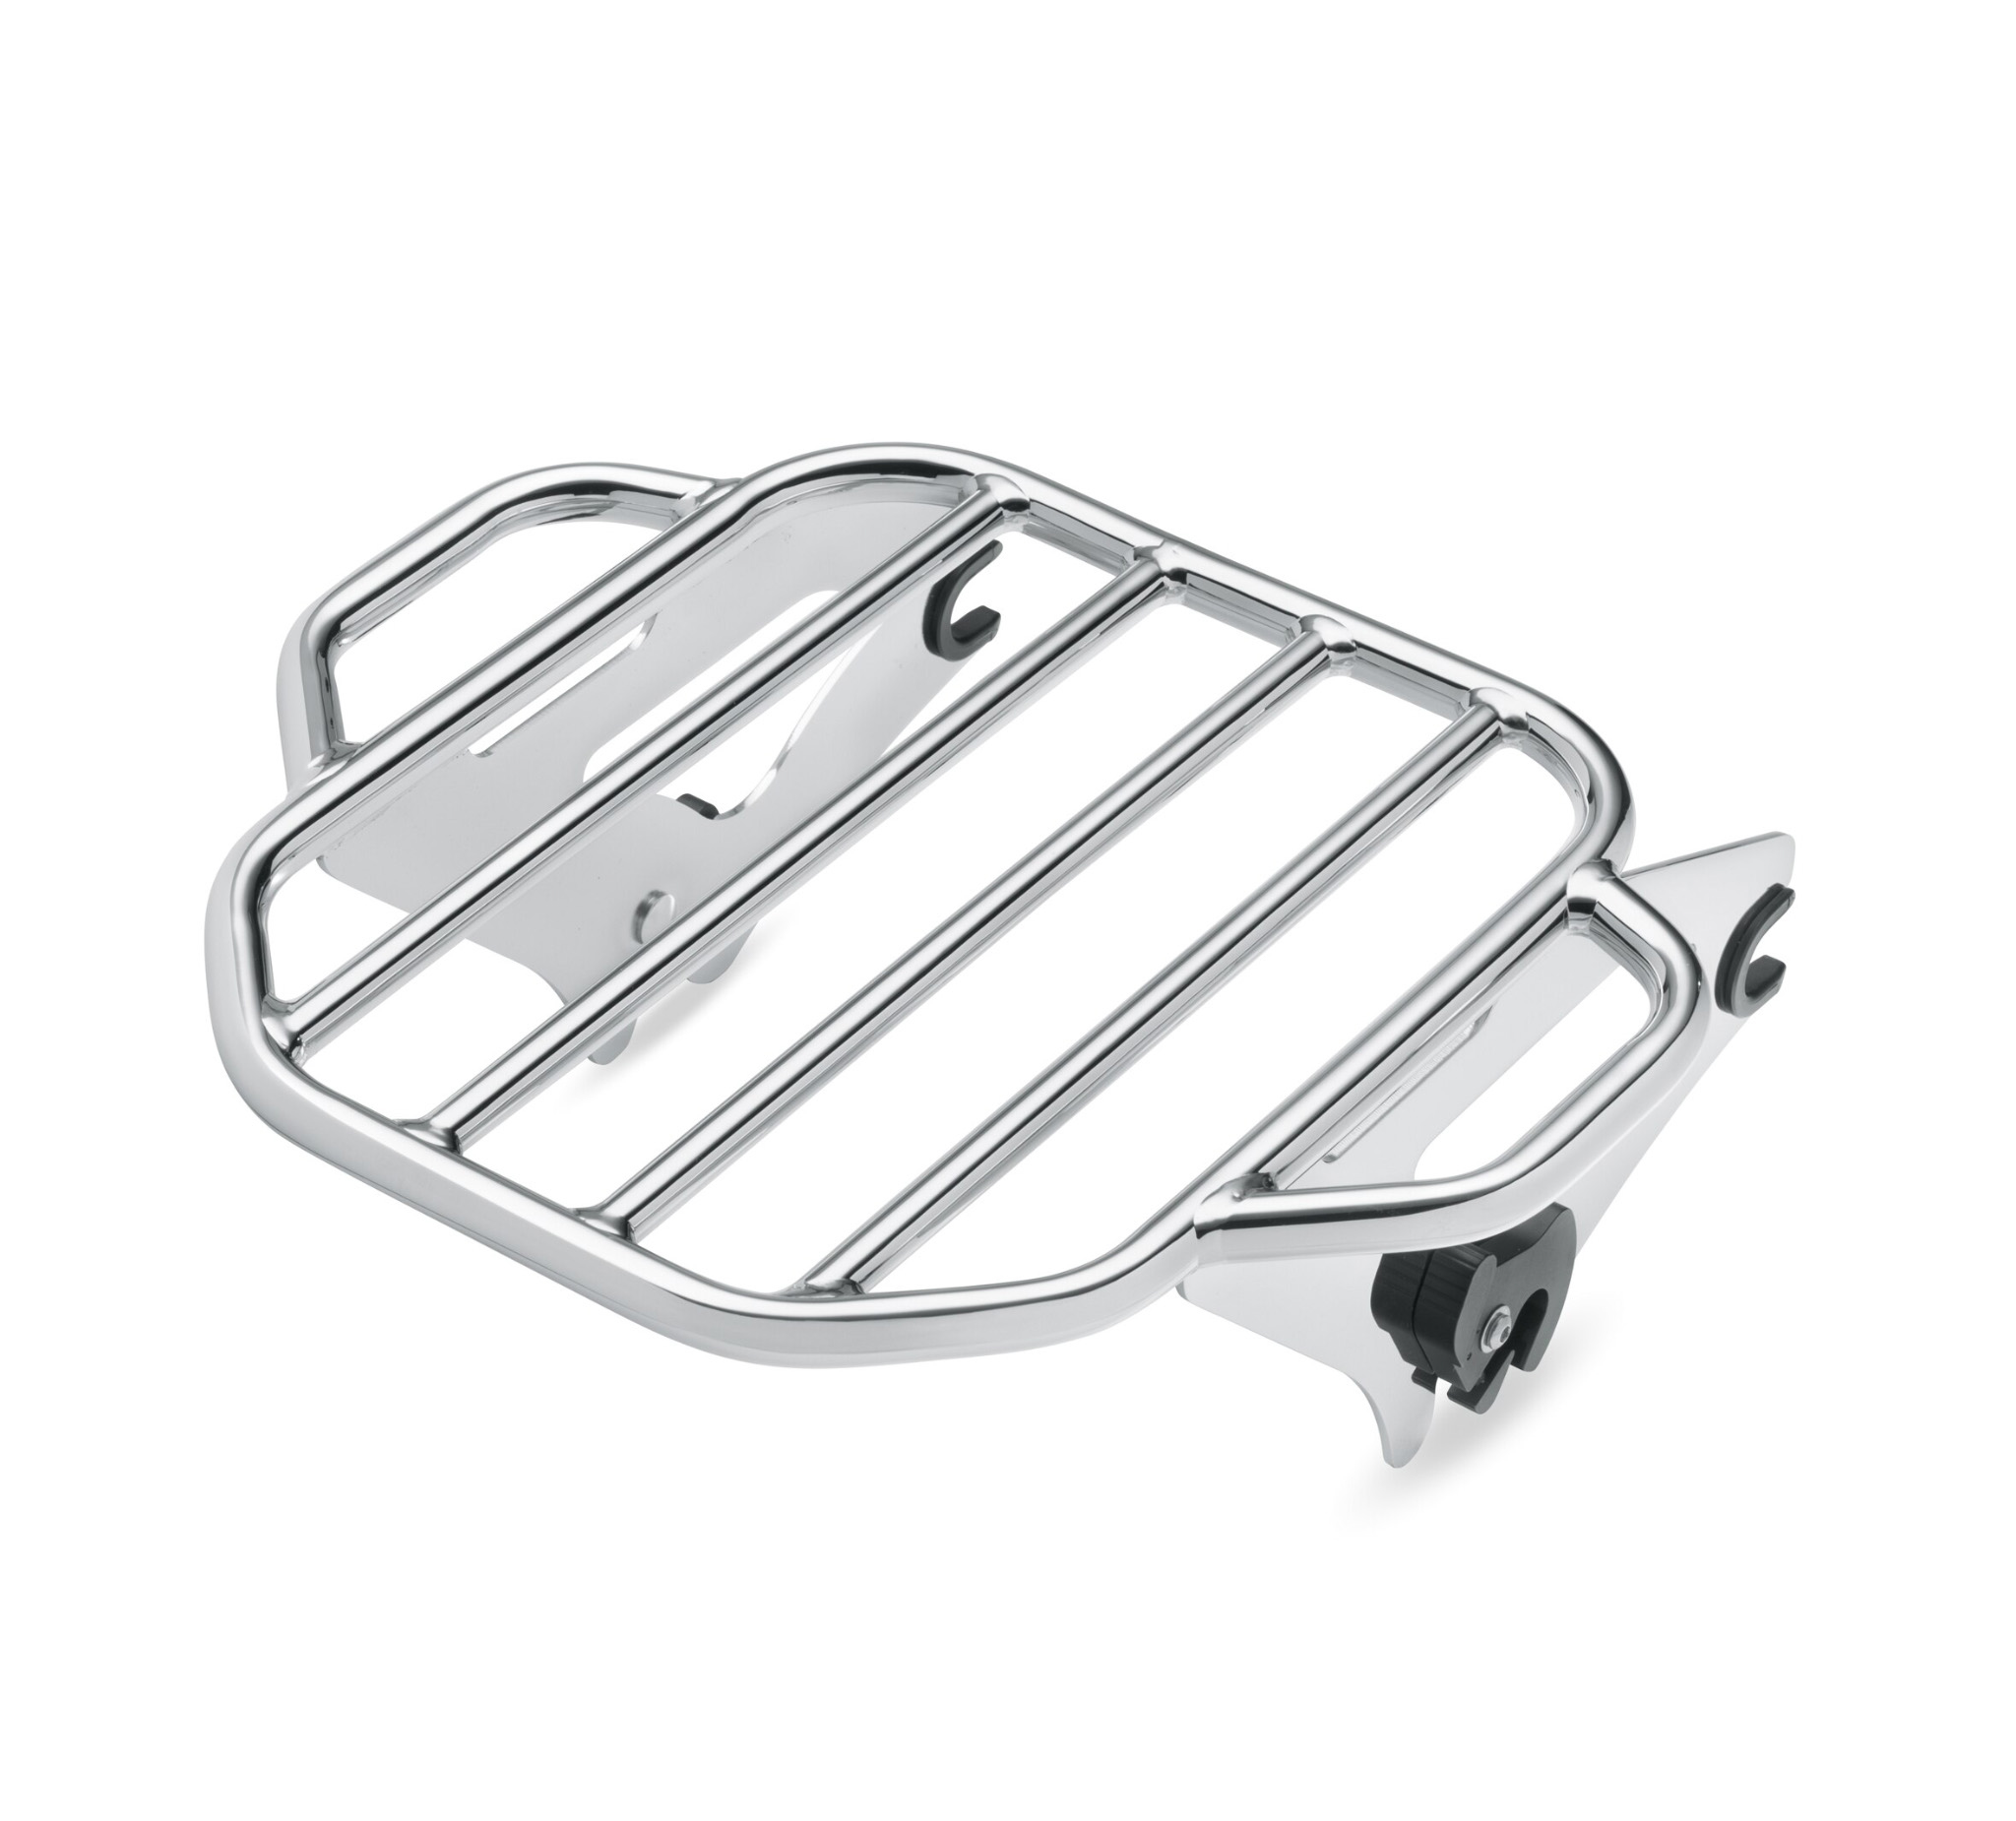 King H-D Detachables Two-Up Luggage Rack 50300054A | Harley